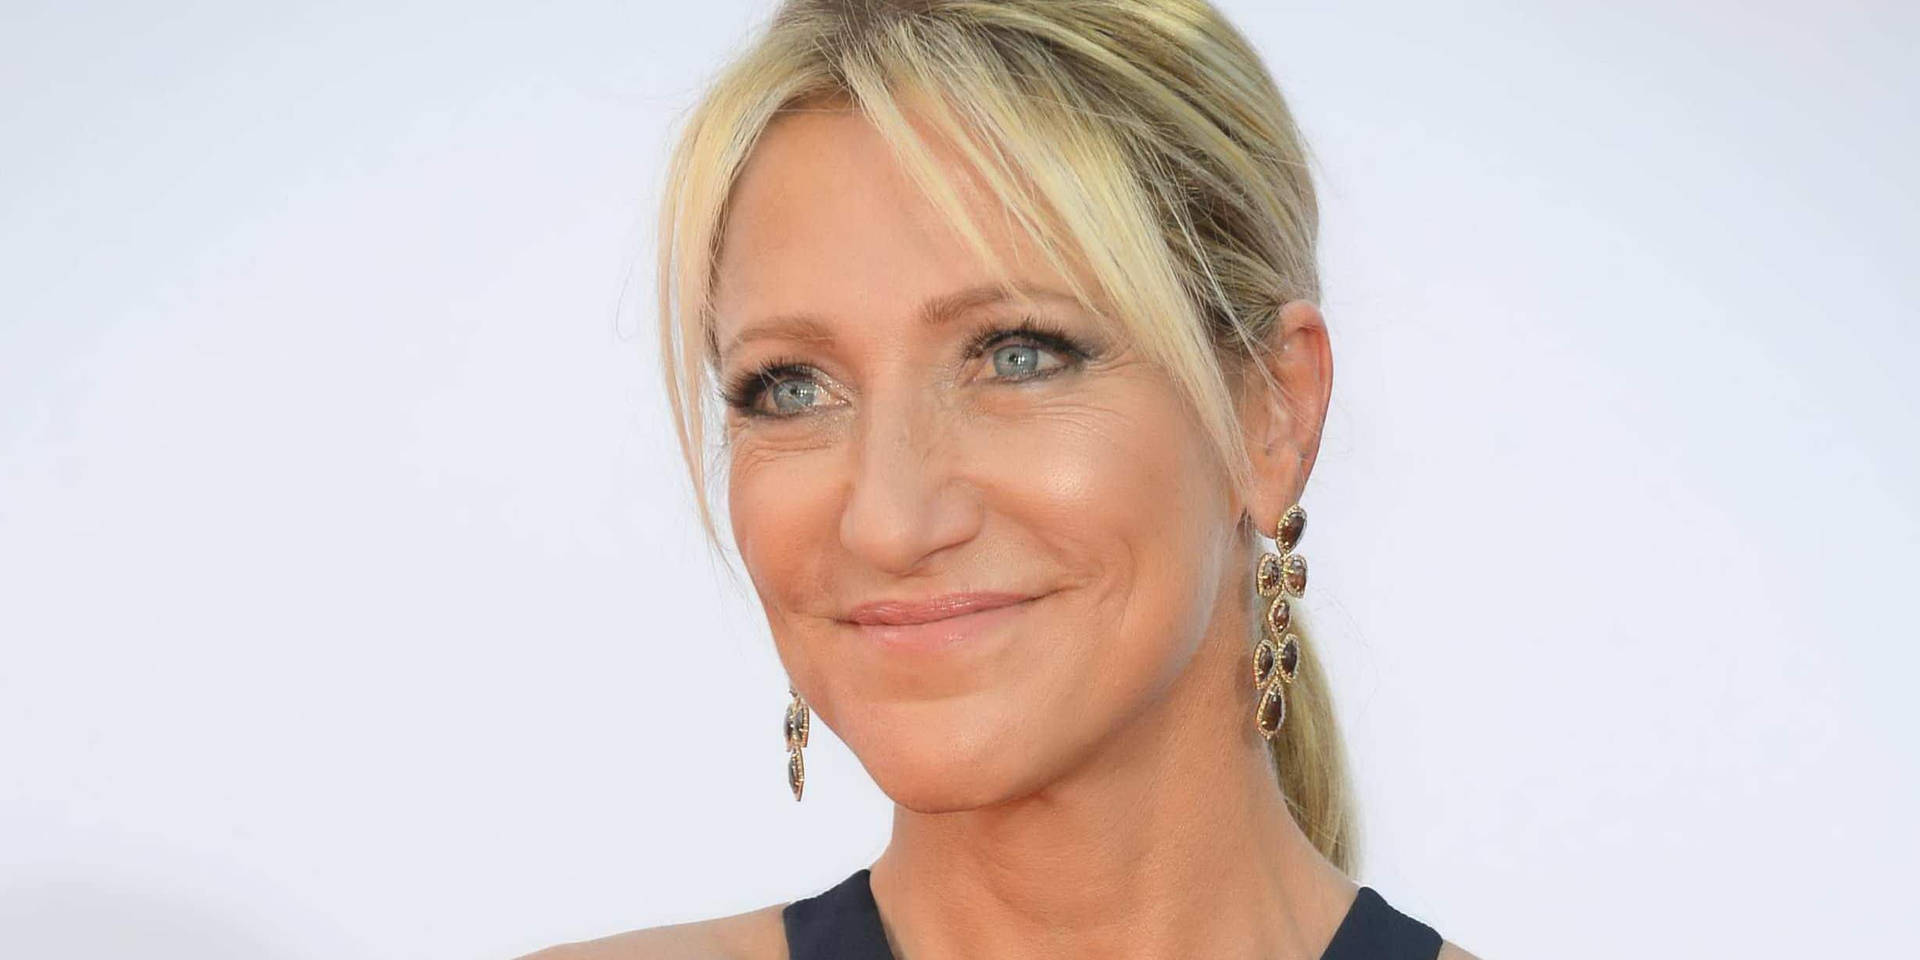 Award-Winning Actress Edie Falco with Ponytail Hairstyle Wallpaper